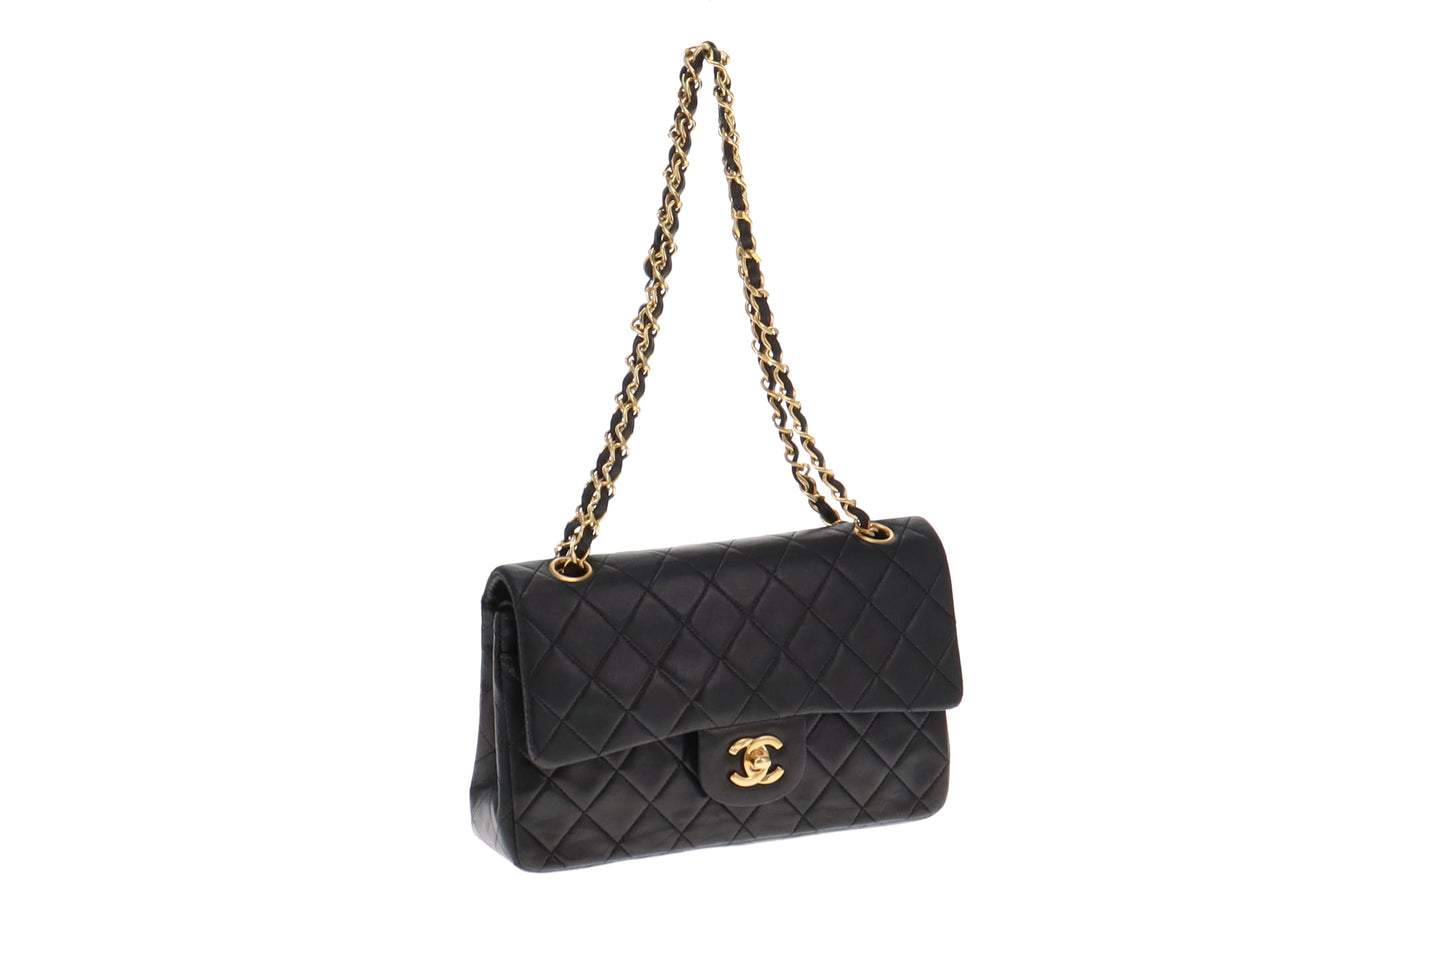 Chanel Black Lambskin GHW Small Vintage Double Flap Classic